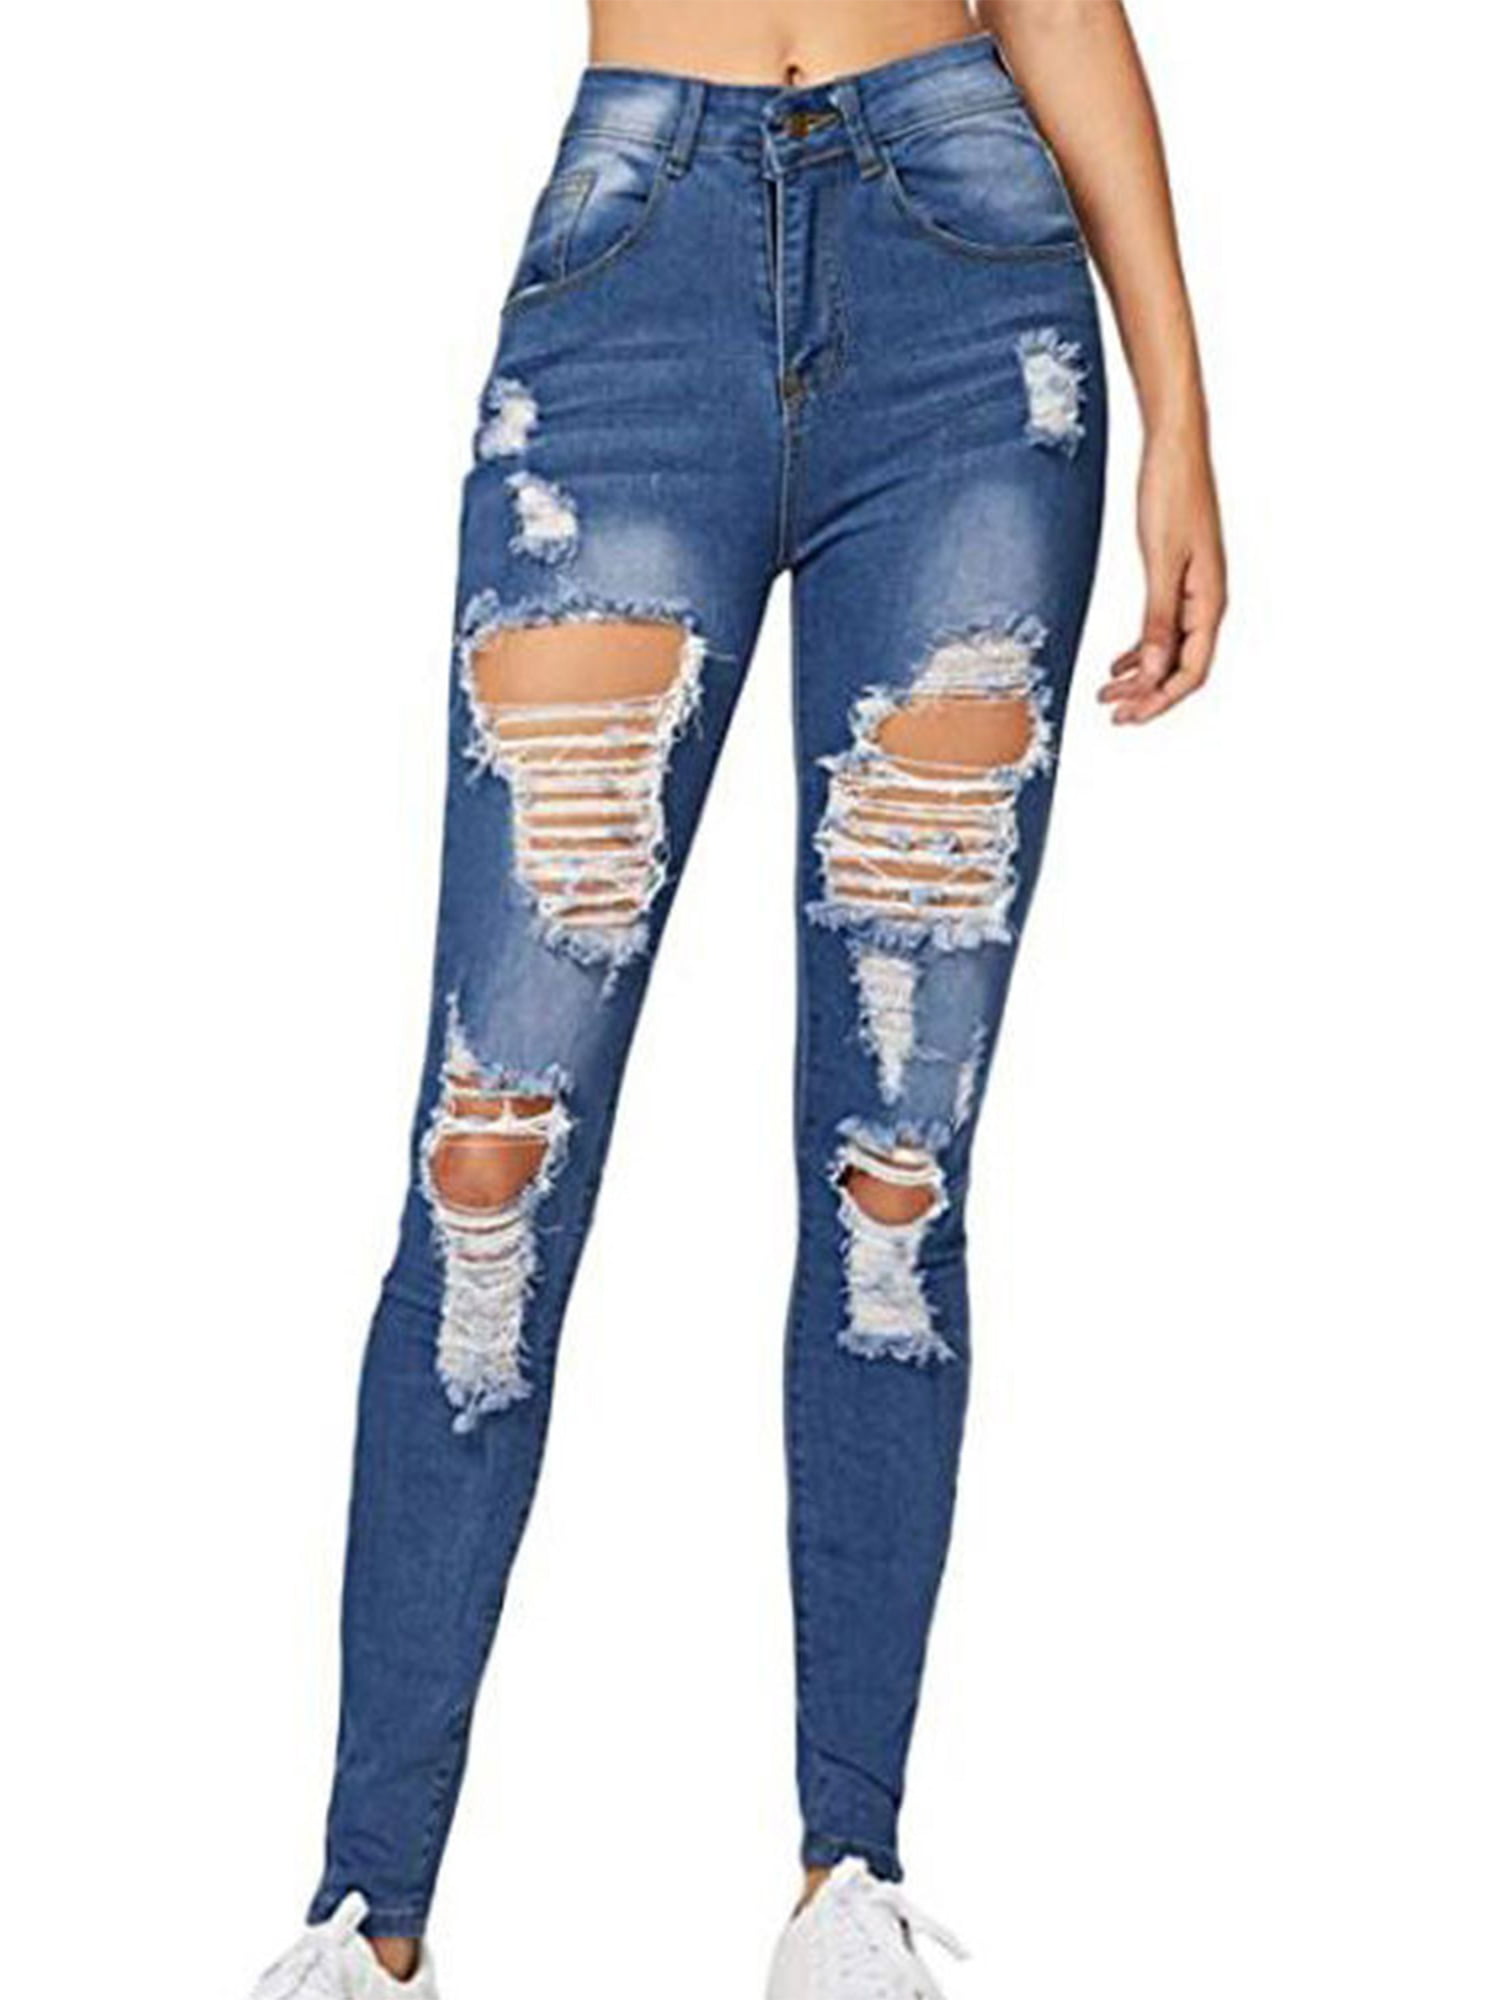 Womens Ex High Street Low Rise Stretchy Skinny Denim Jeans Womens Jeggings Pants 